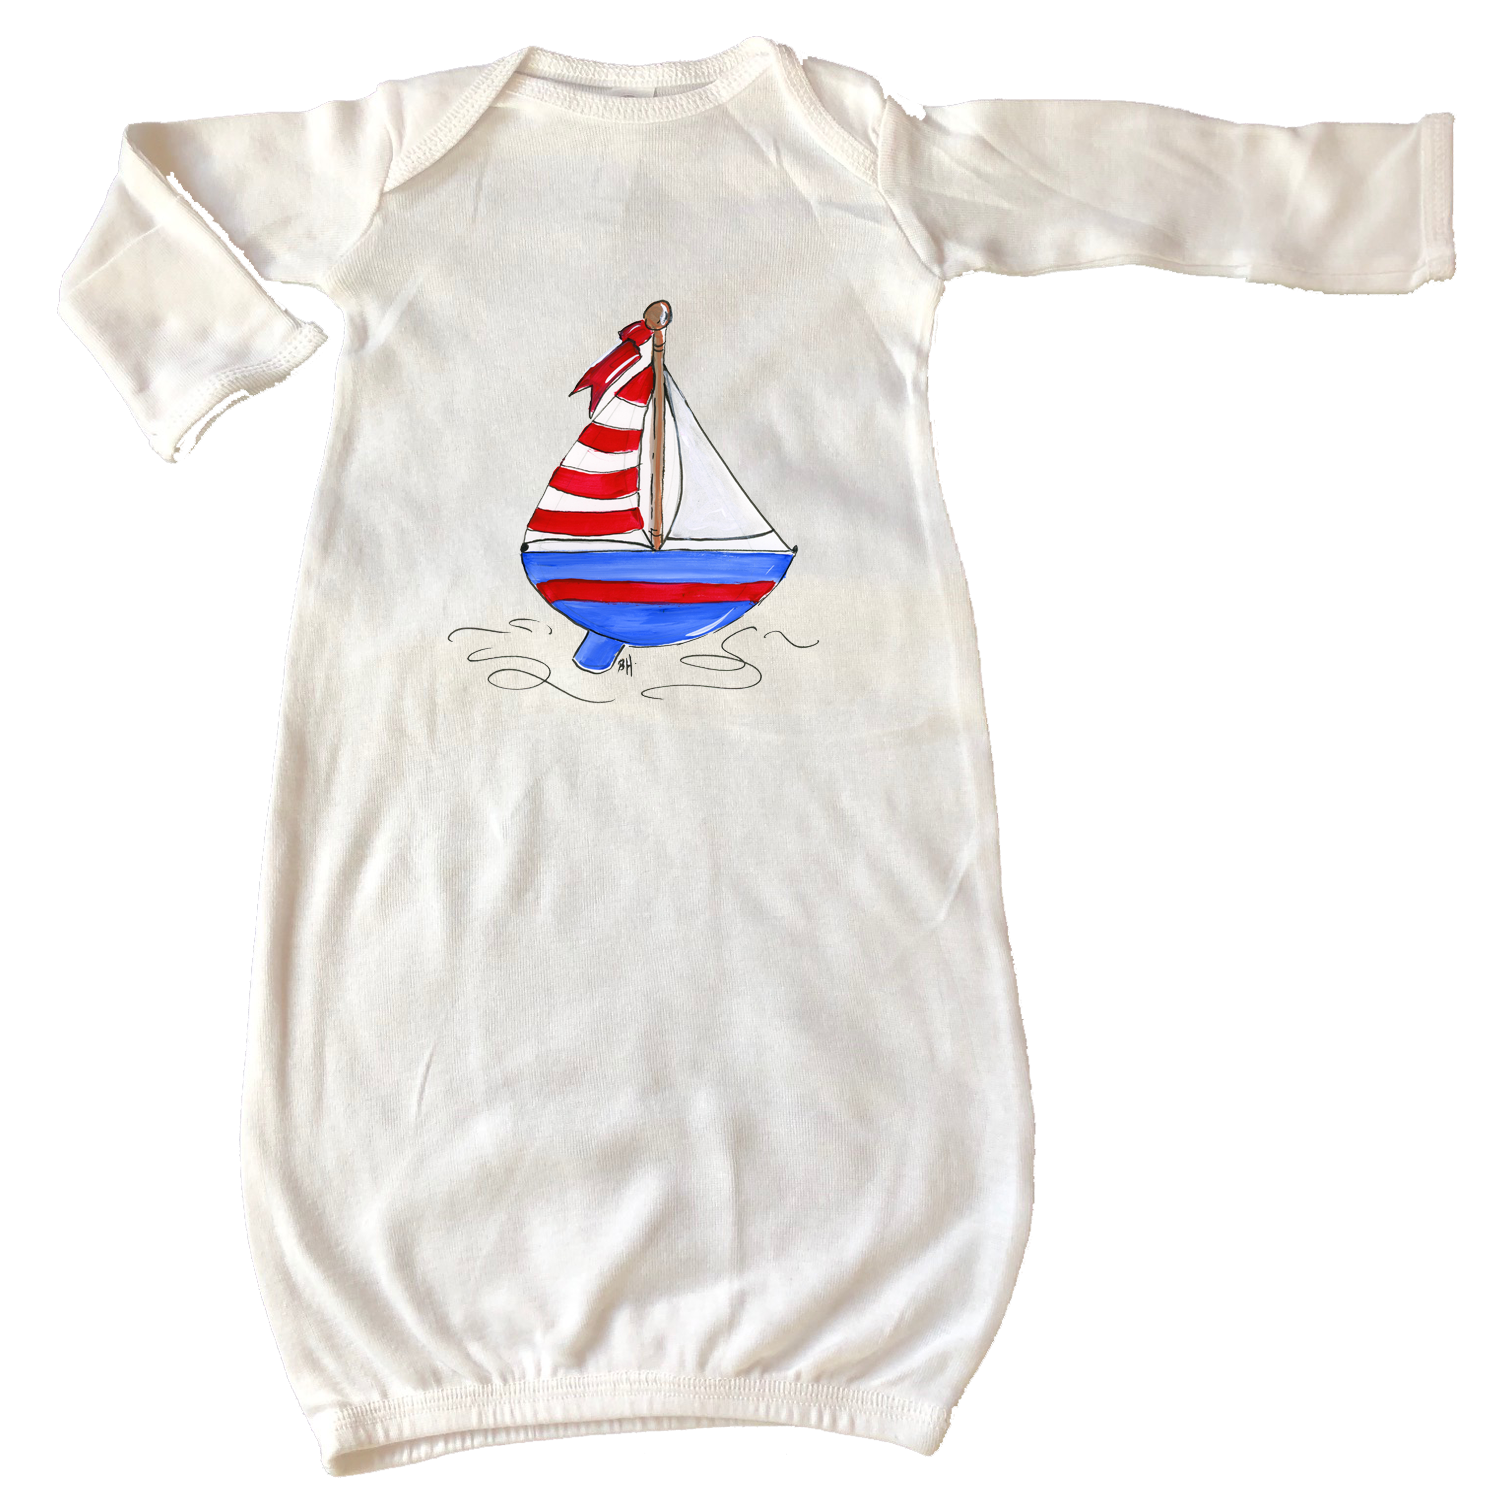 Infant Gown 1070 Red, White, Blue Boating